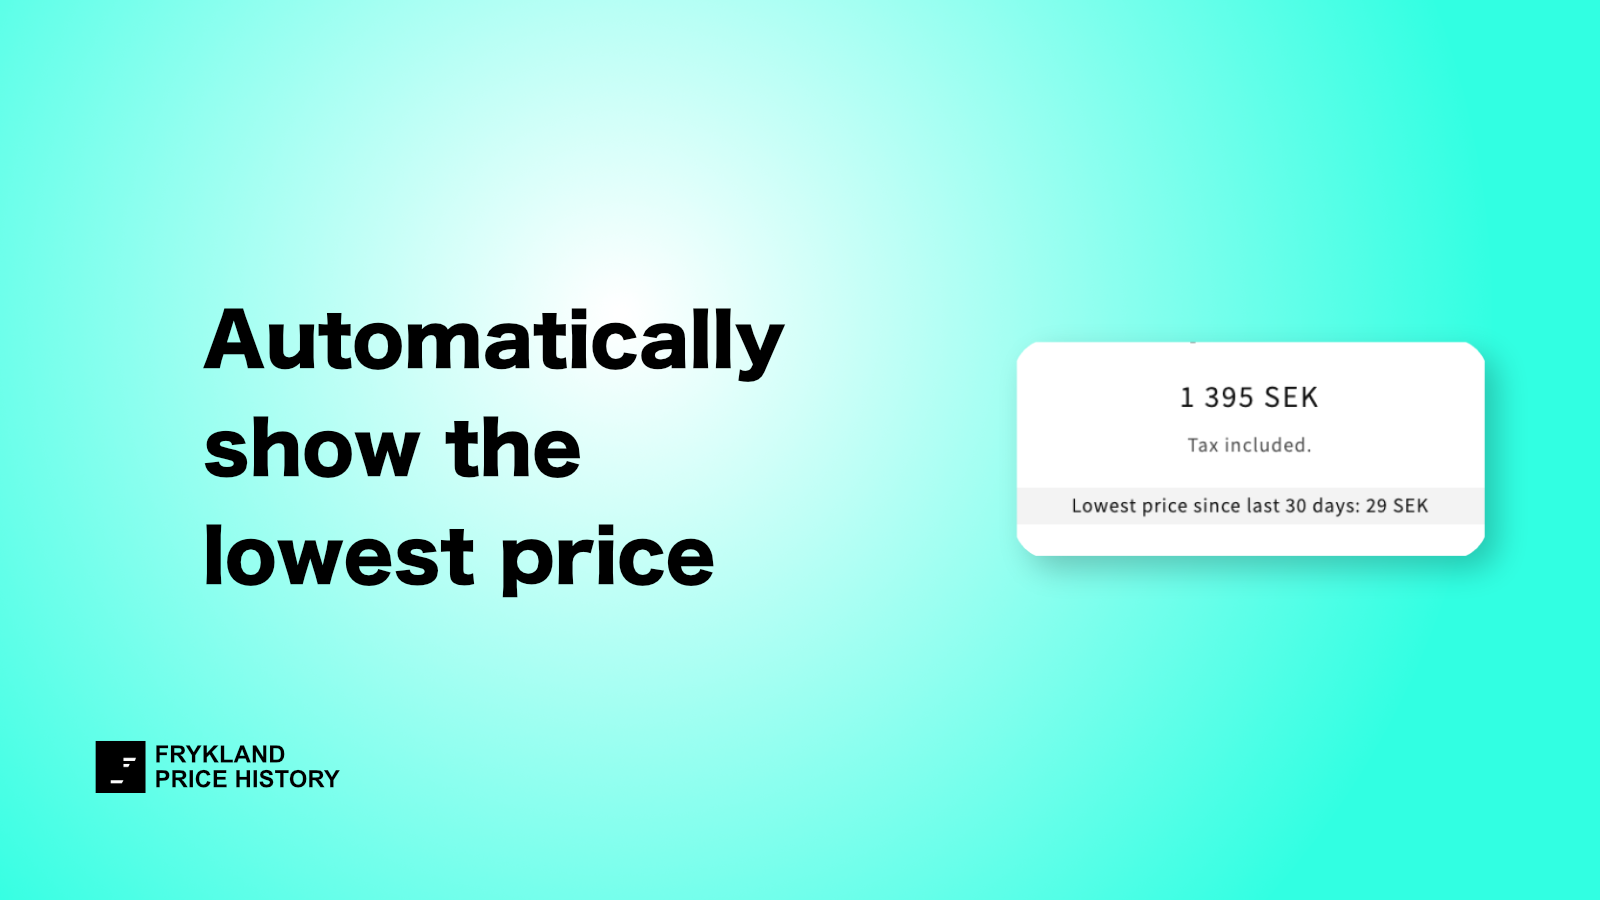 Automatically shows the lowest price on product pages.